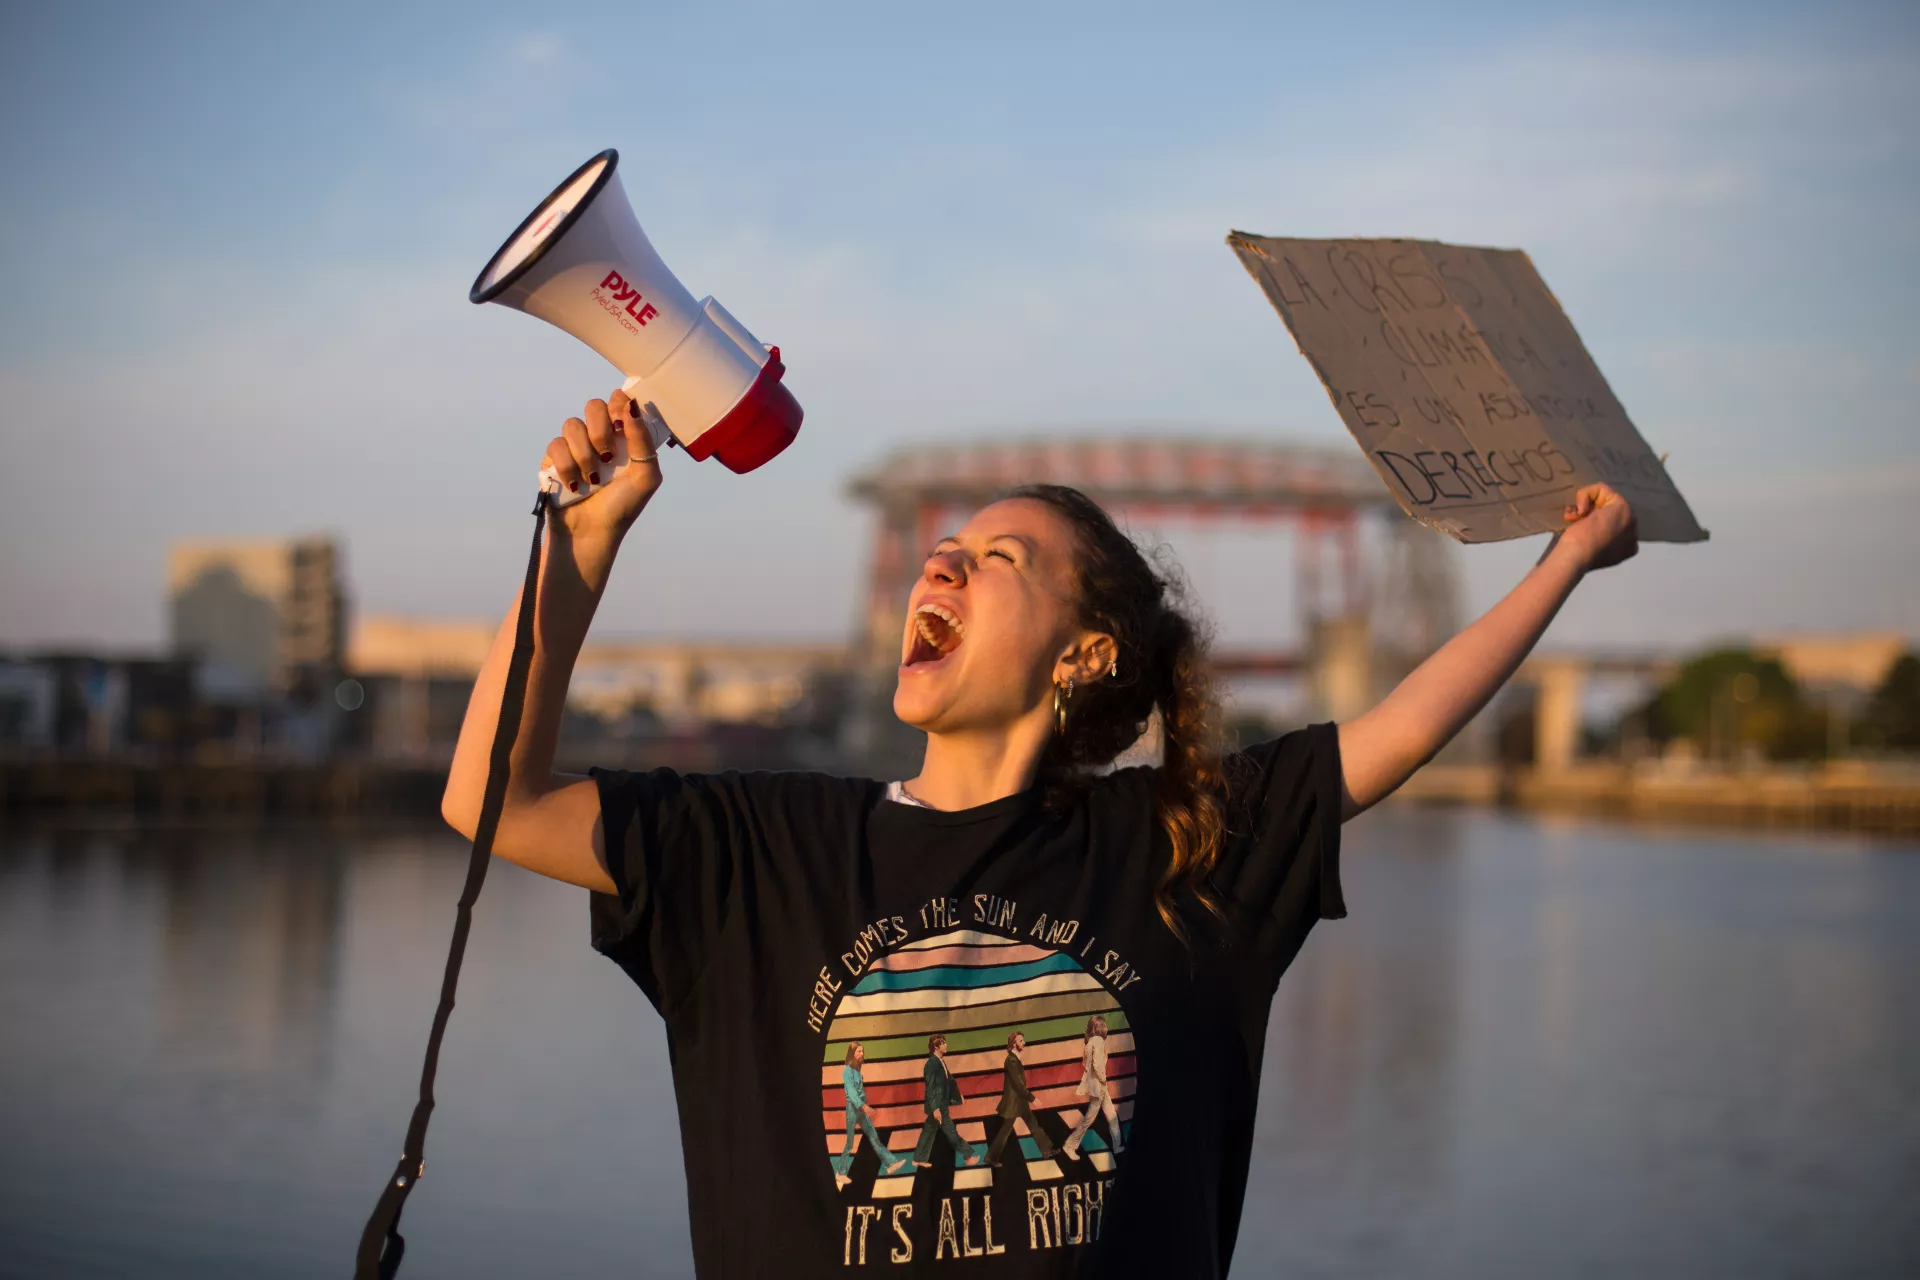 A nineteen-year-old climate activist in Argentina stands outside, arms in air, shouting into a bullhorn.